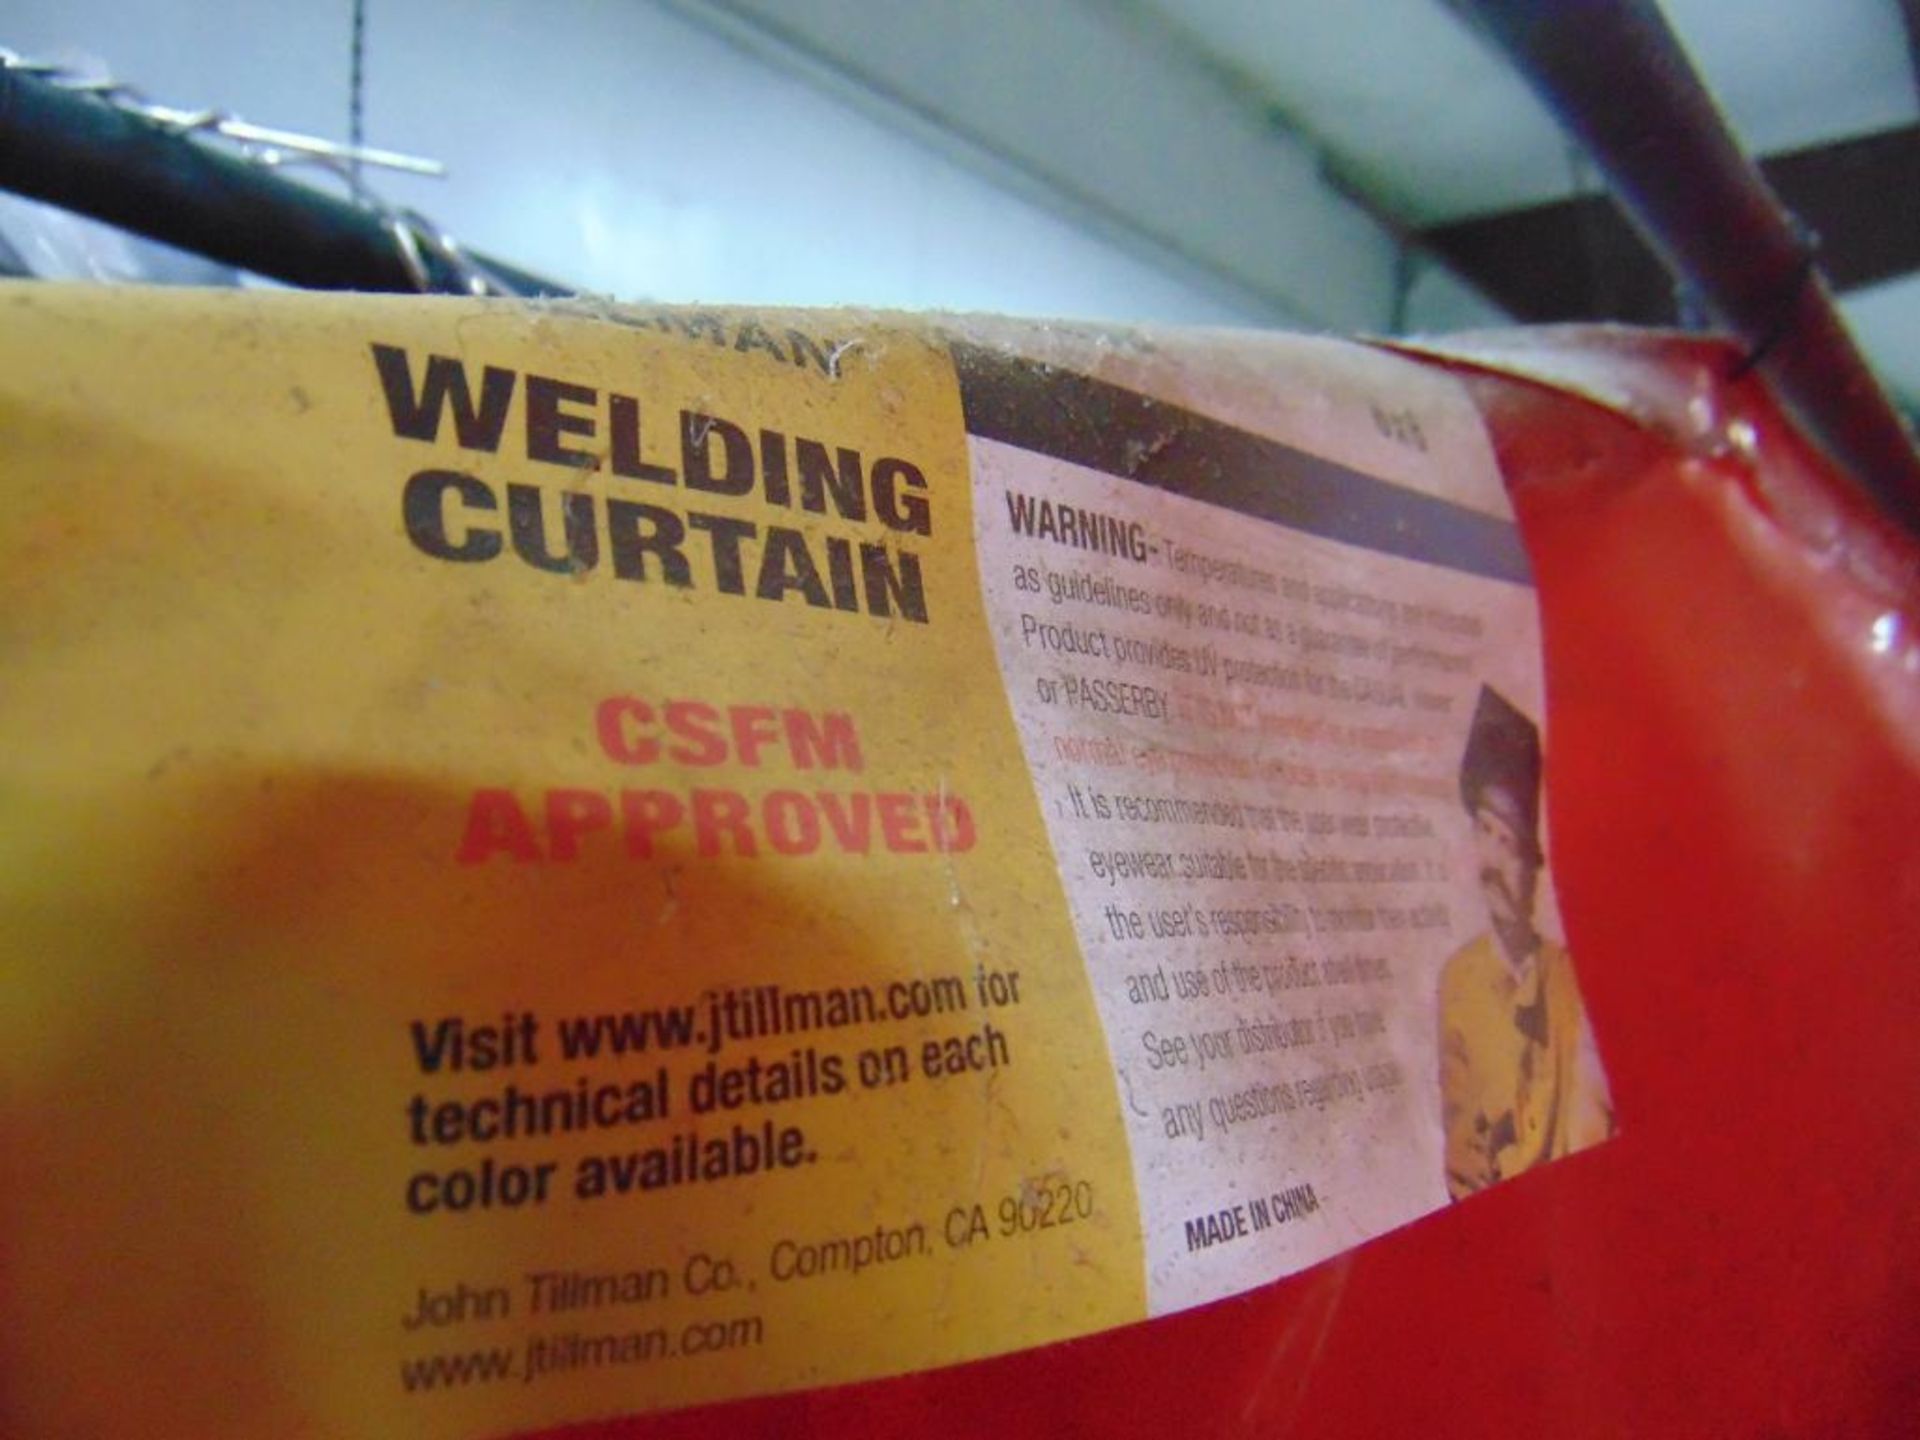 Welding Curtains - Image 3 of 3